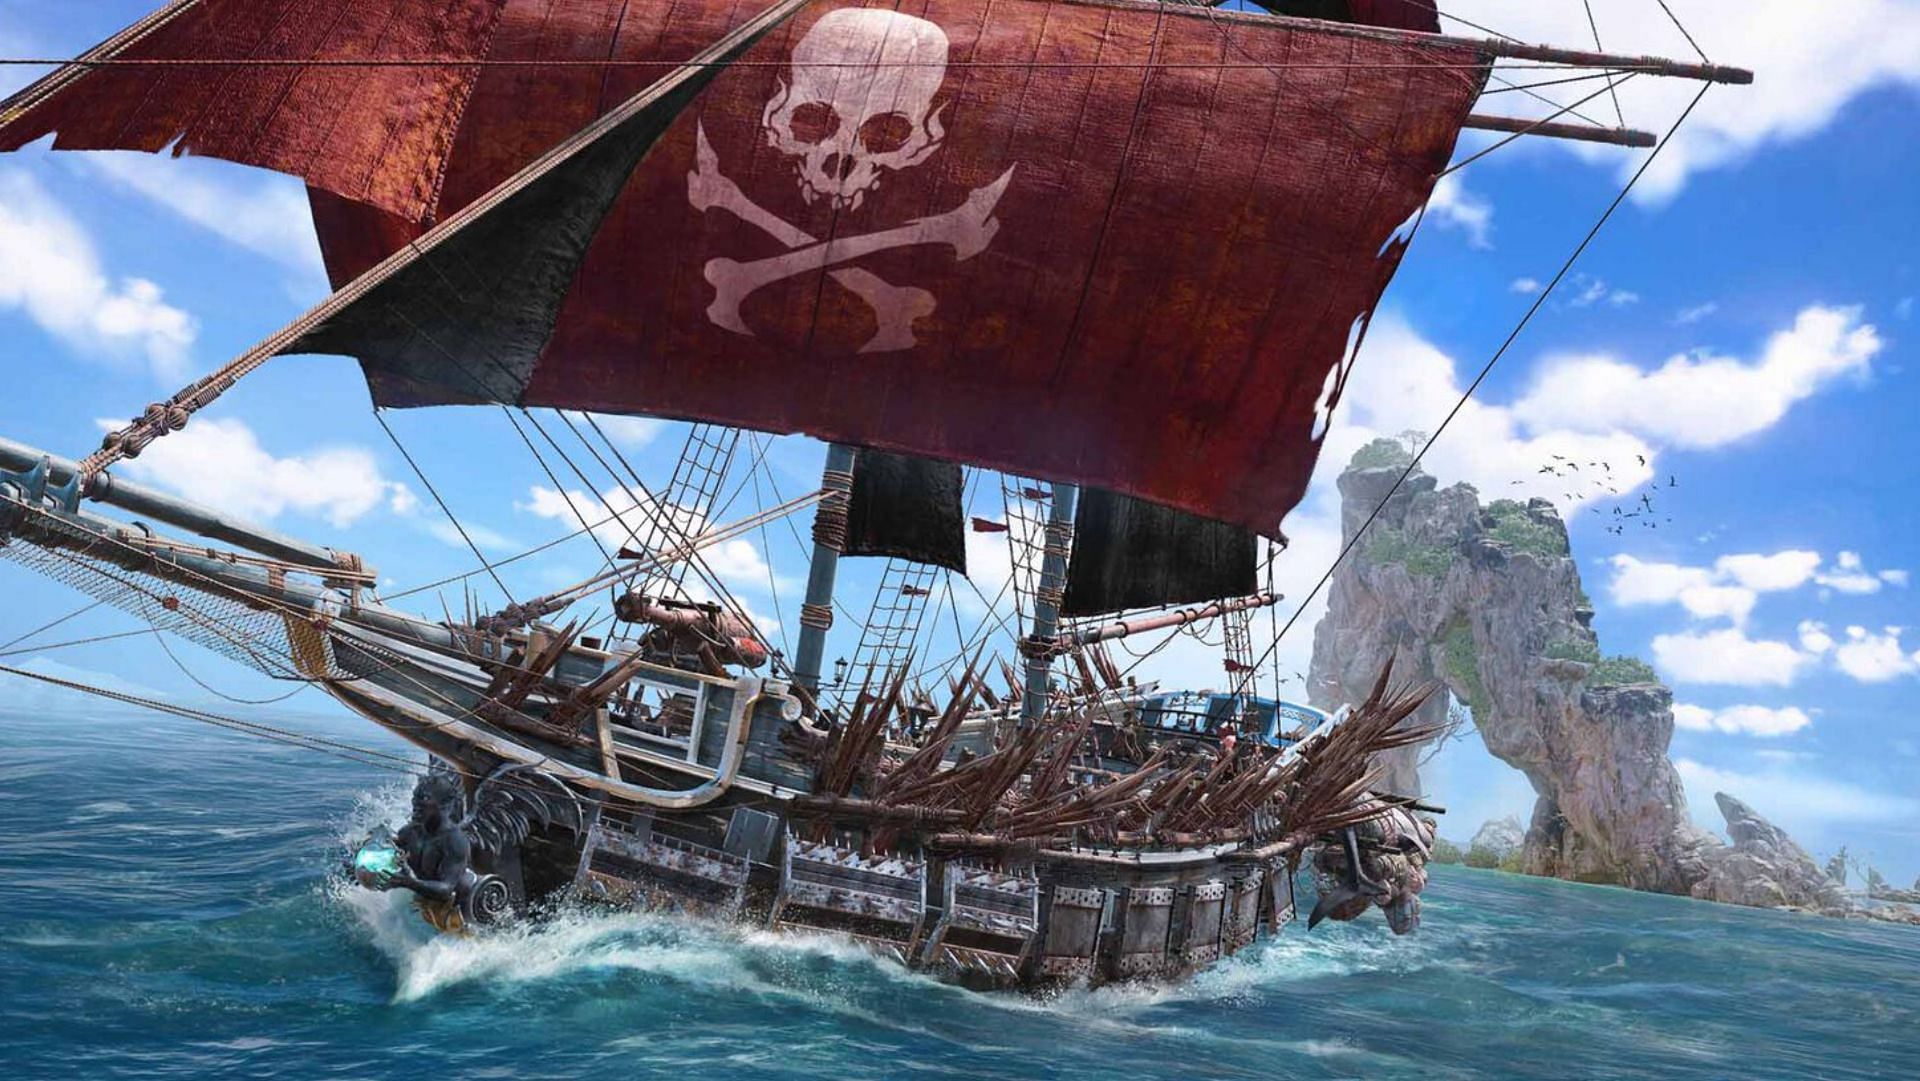 Skull and Bones is delayed to next year, despite promising a November 2022 release and pushing pre-orders on digital storefronts (Image via Ubisoft)